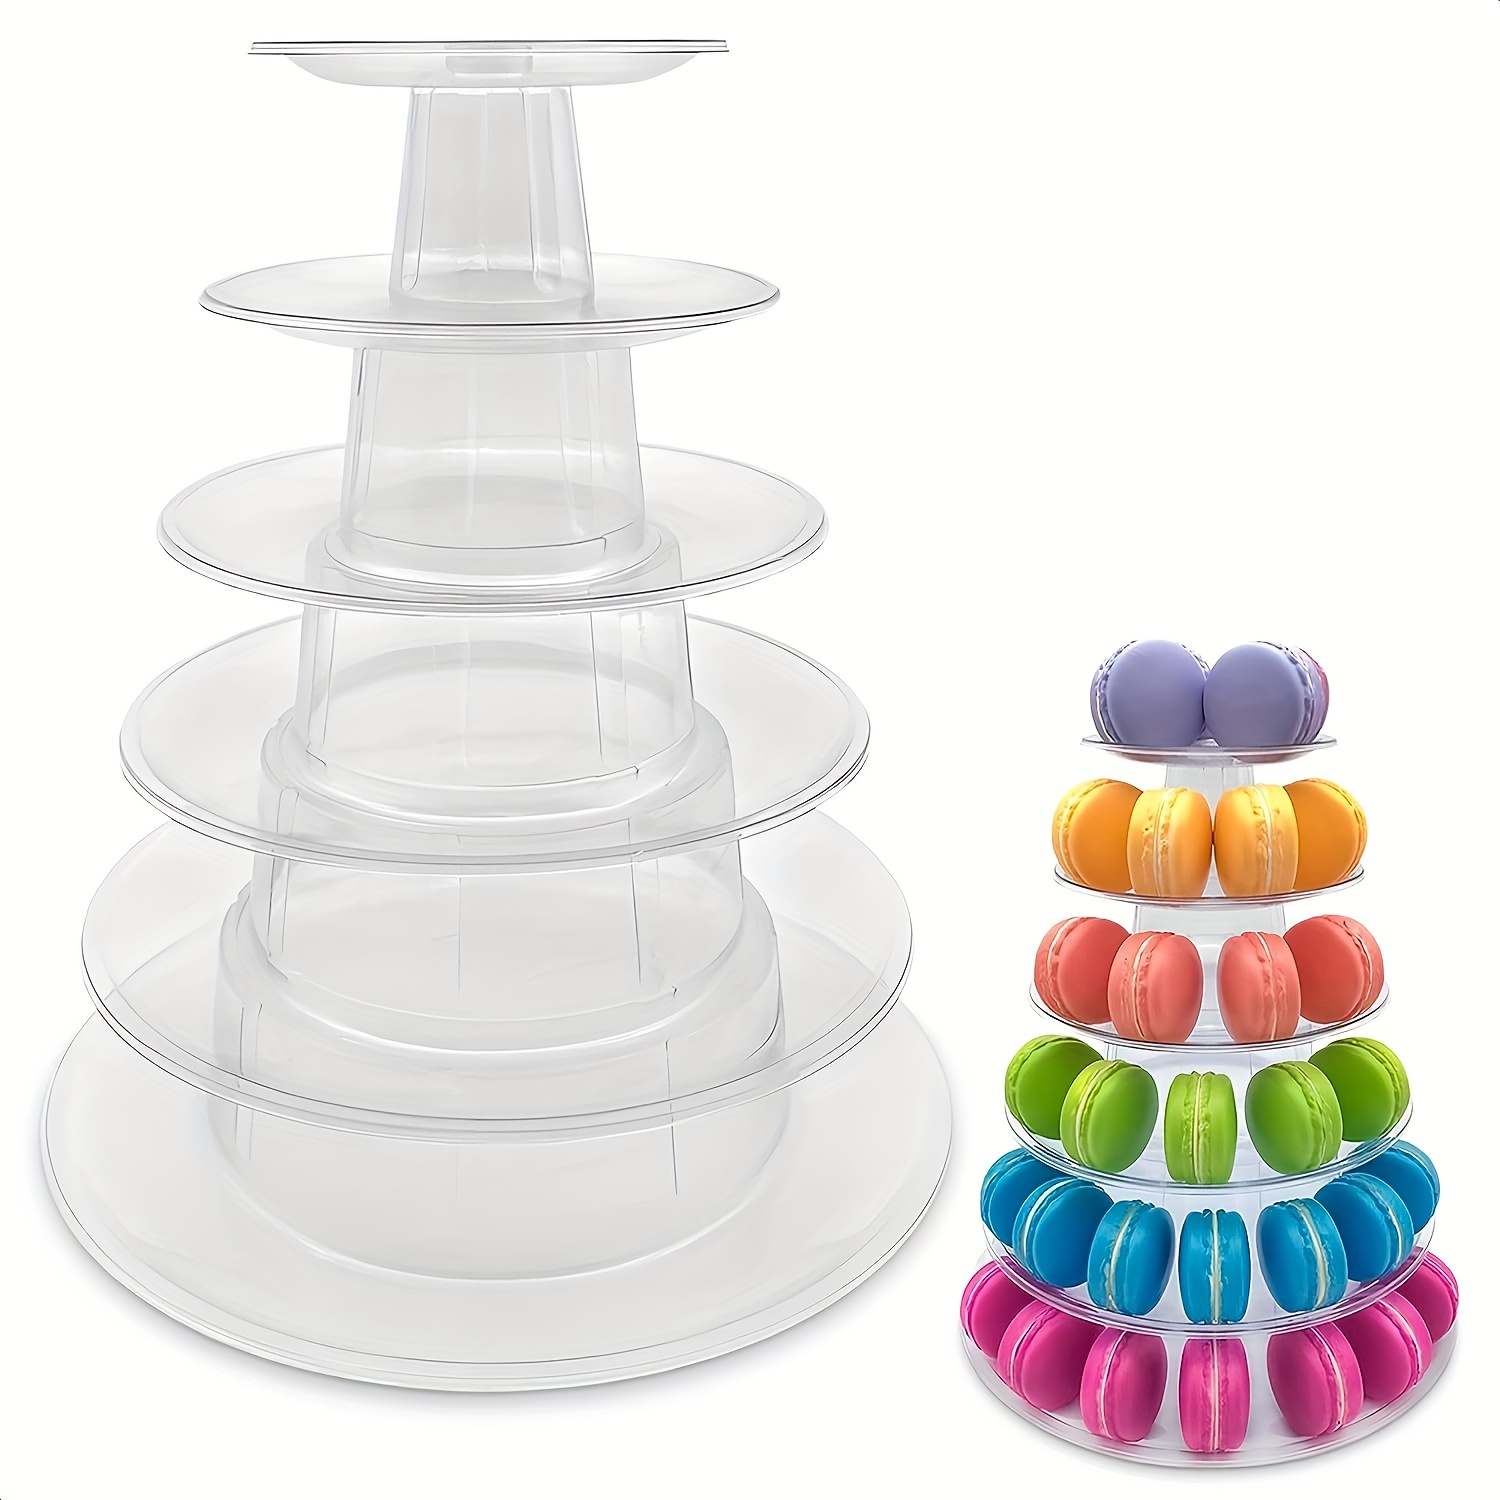 

1pc 4/6/10 Tier Round Macaron Display Stand Cake Stand Dessert Cupcake Stand Cookie Tray Rack Desserts Display For Wedding Birthday Party Baby Shower Bakery Decor Halloween Christmas Thanksgiving